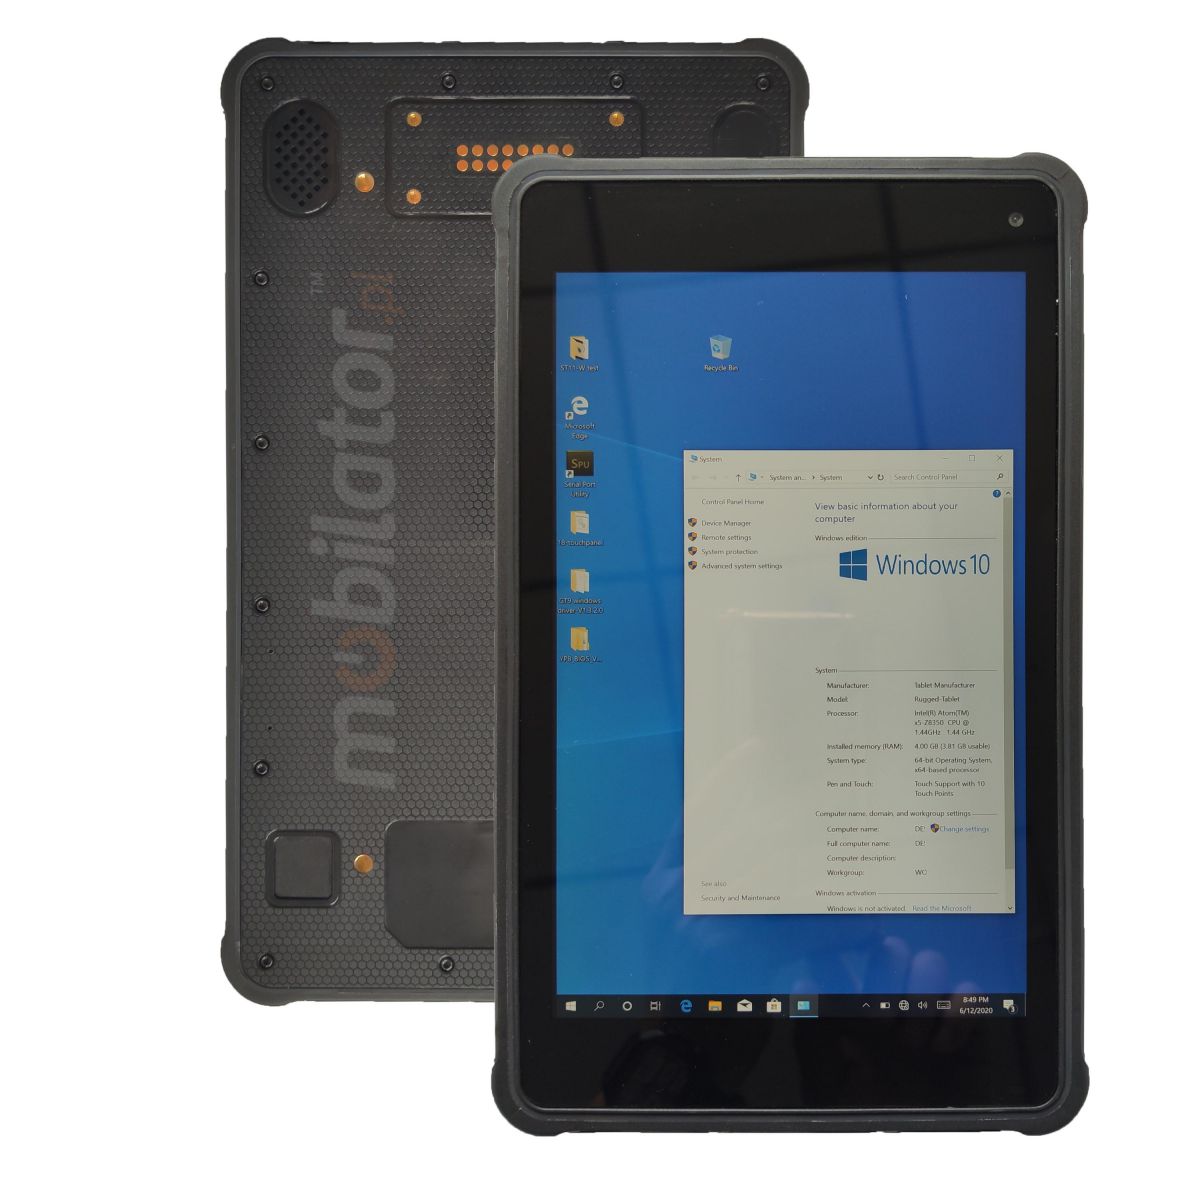 Industrial 8-inch tablet with 64GB ROM disk and 4GB RAM memory, WINDOWS 10 operating system, IP65 and NFC standards - MobiPad ST800B v.1 